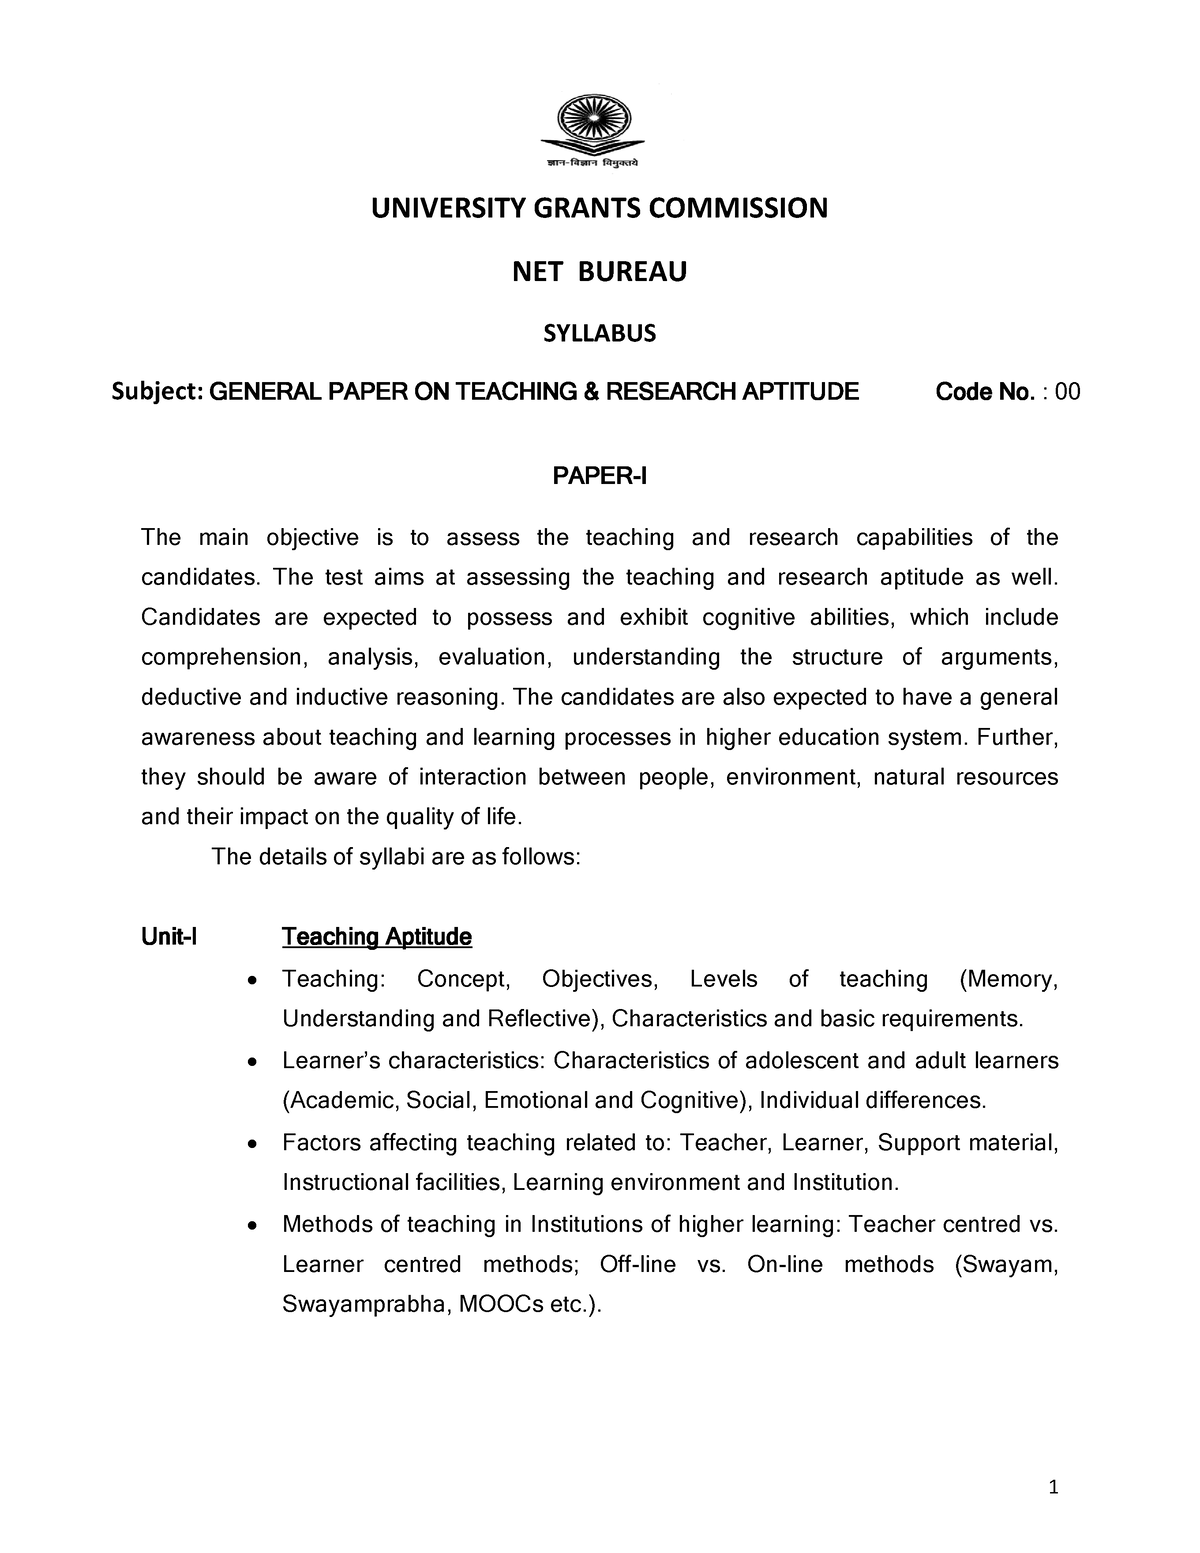 general paper on teaching & research aptitude